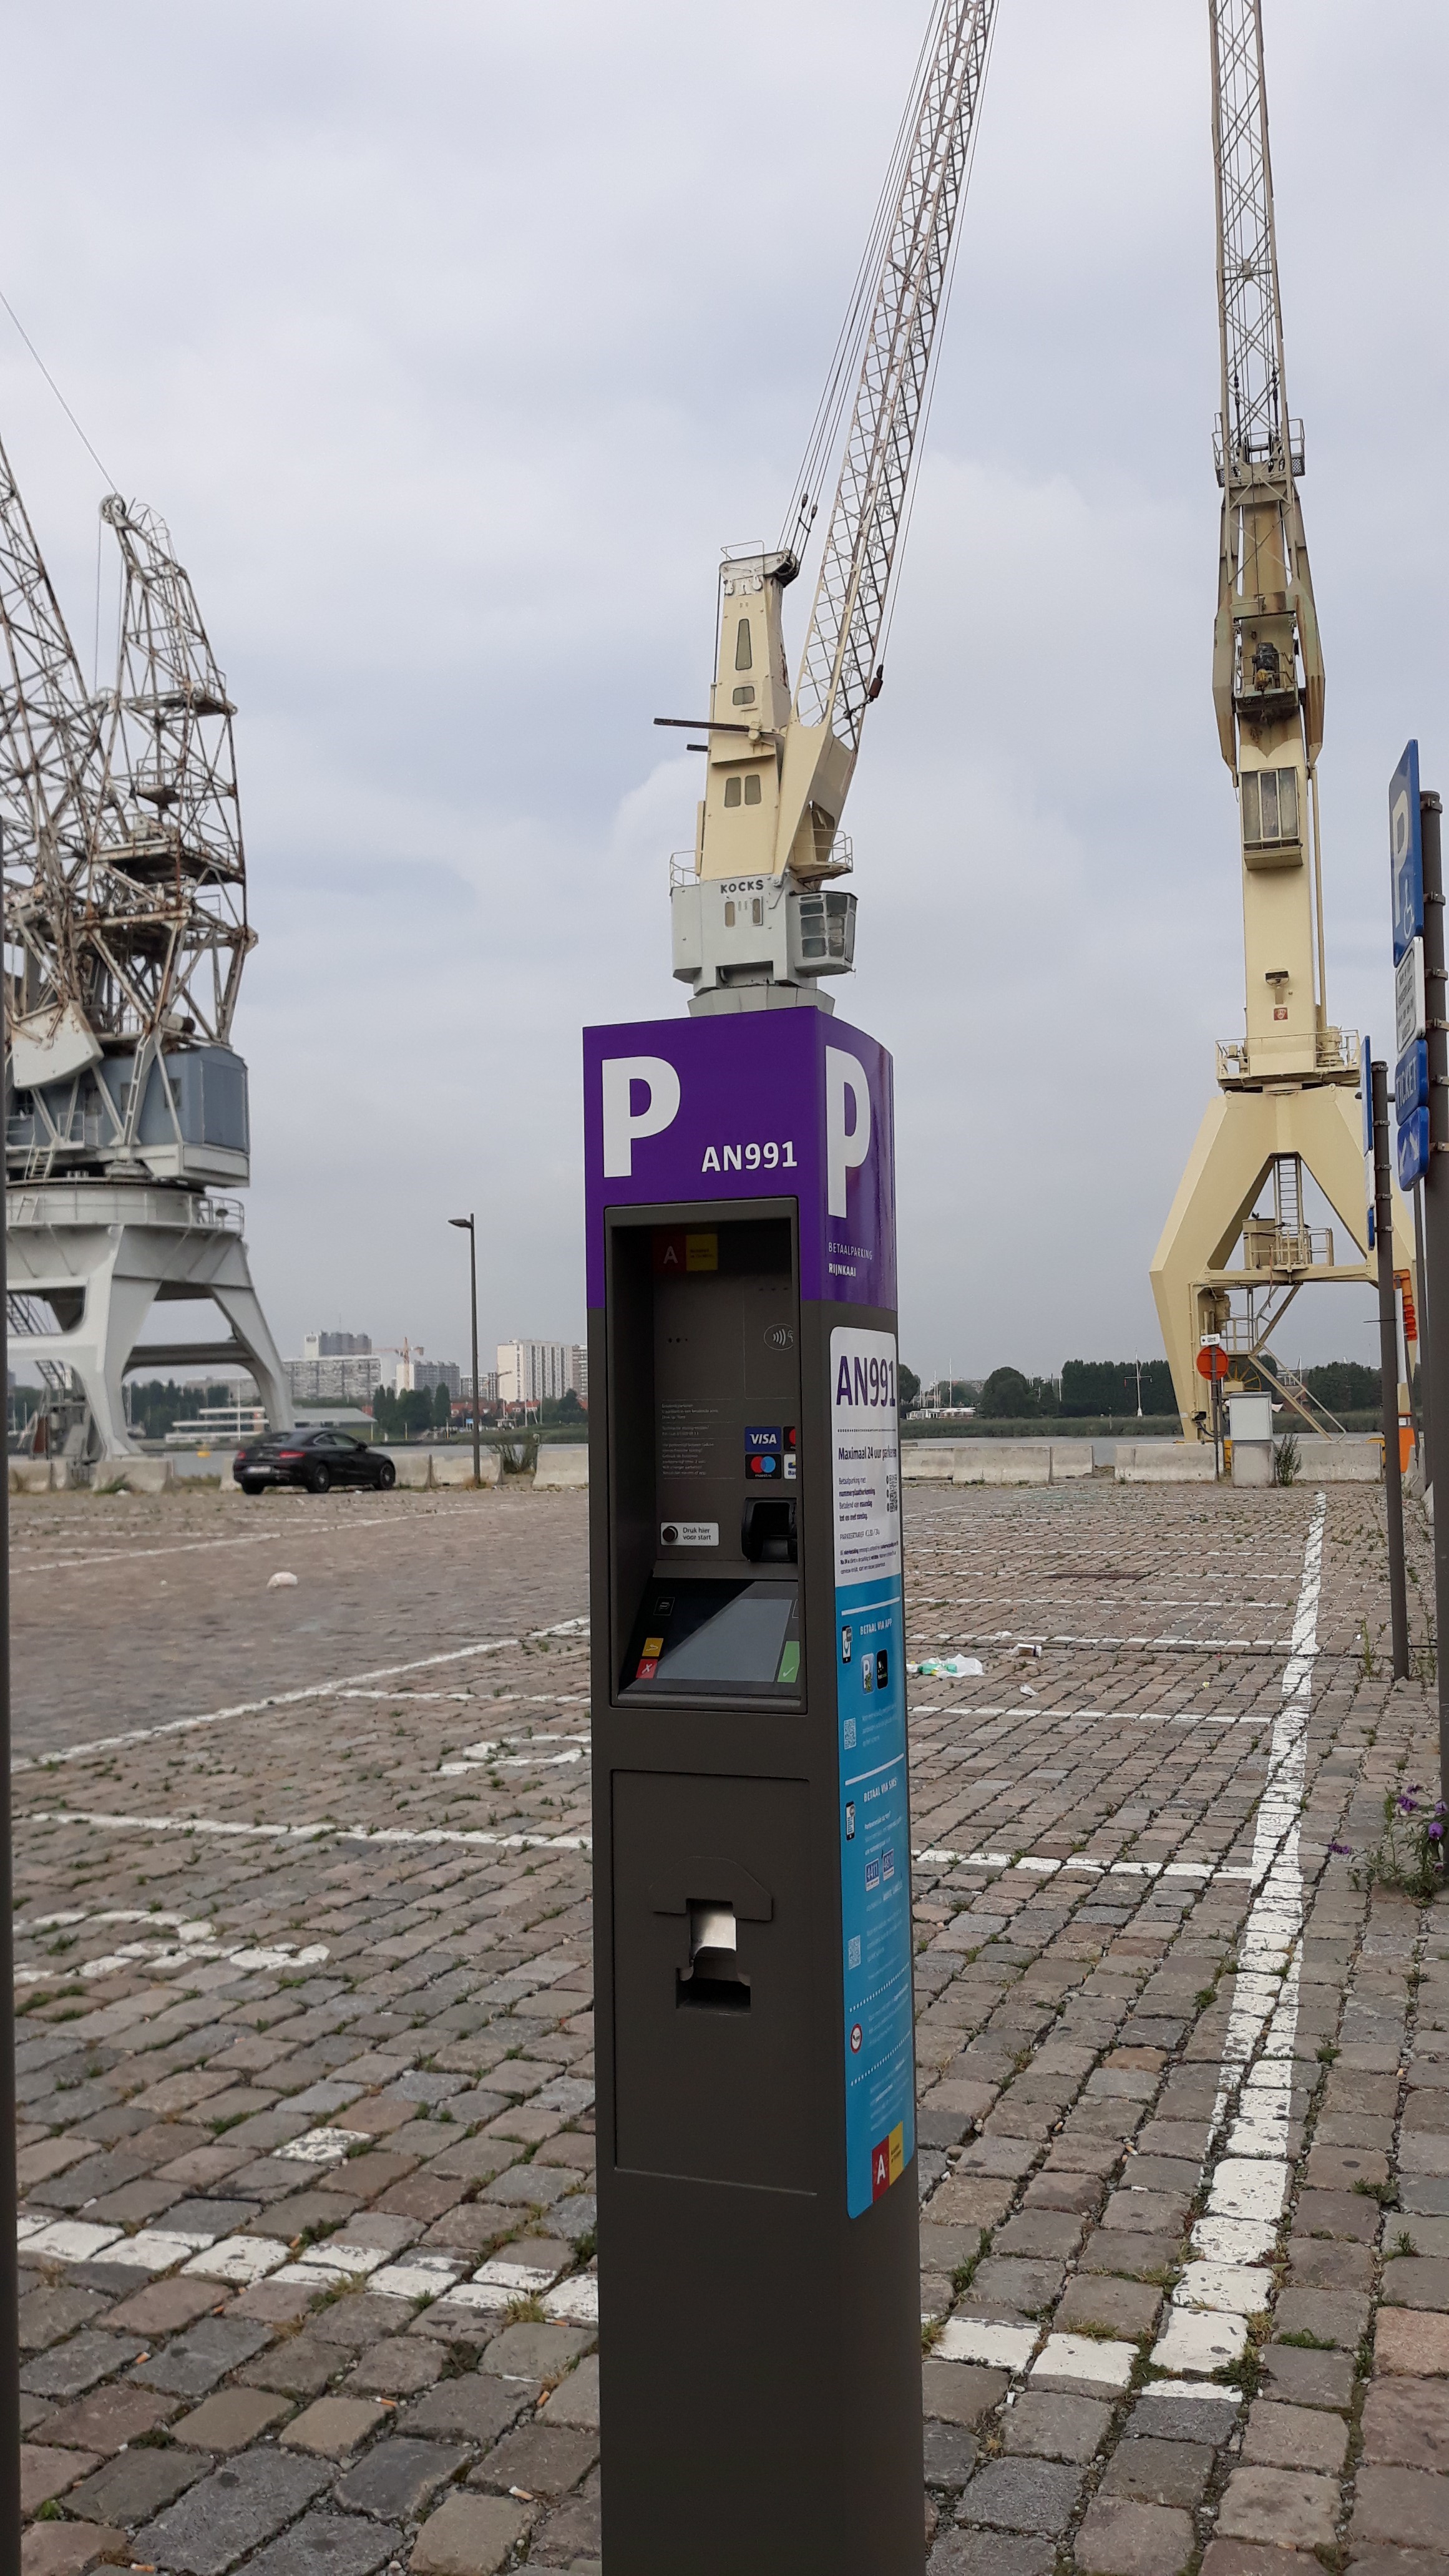 IEM Group supports the city of Antwerp towards a more sustainable journey with the installation of 960 PrestoInteractif parking meters